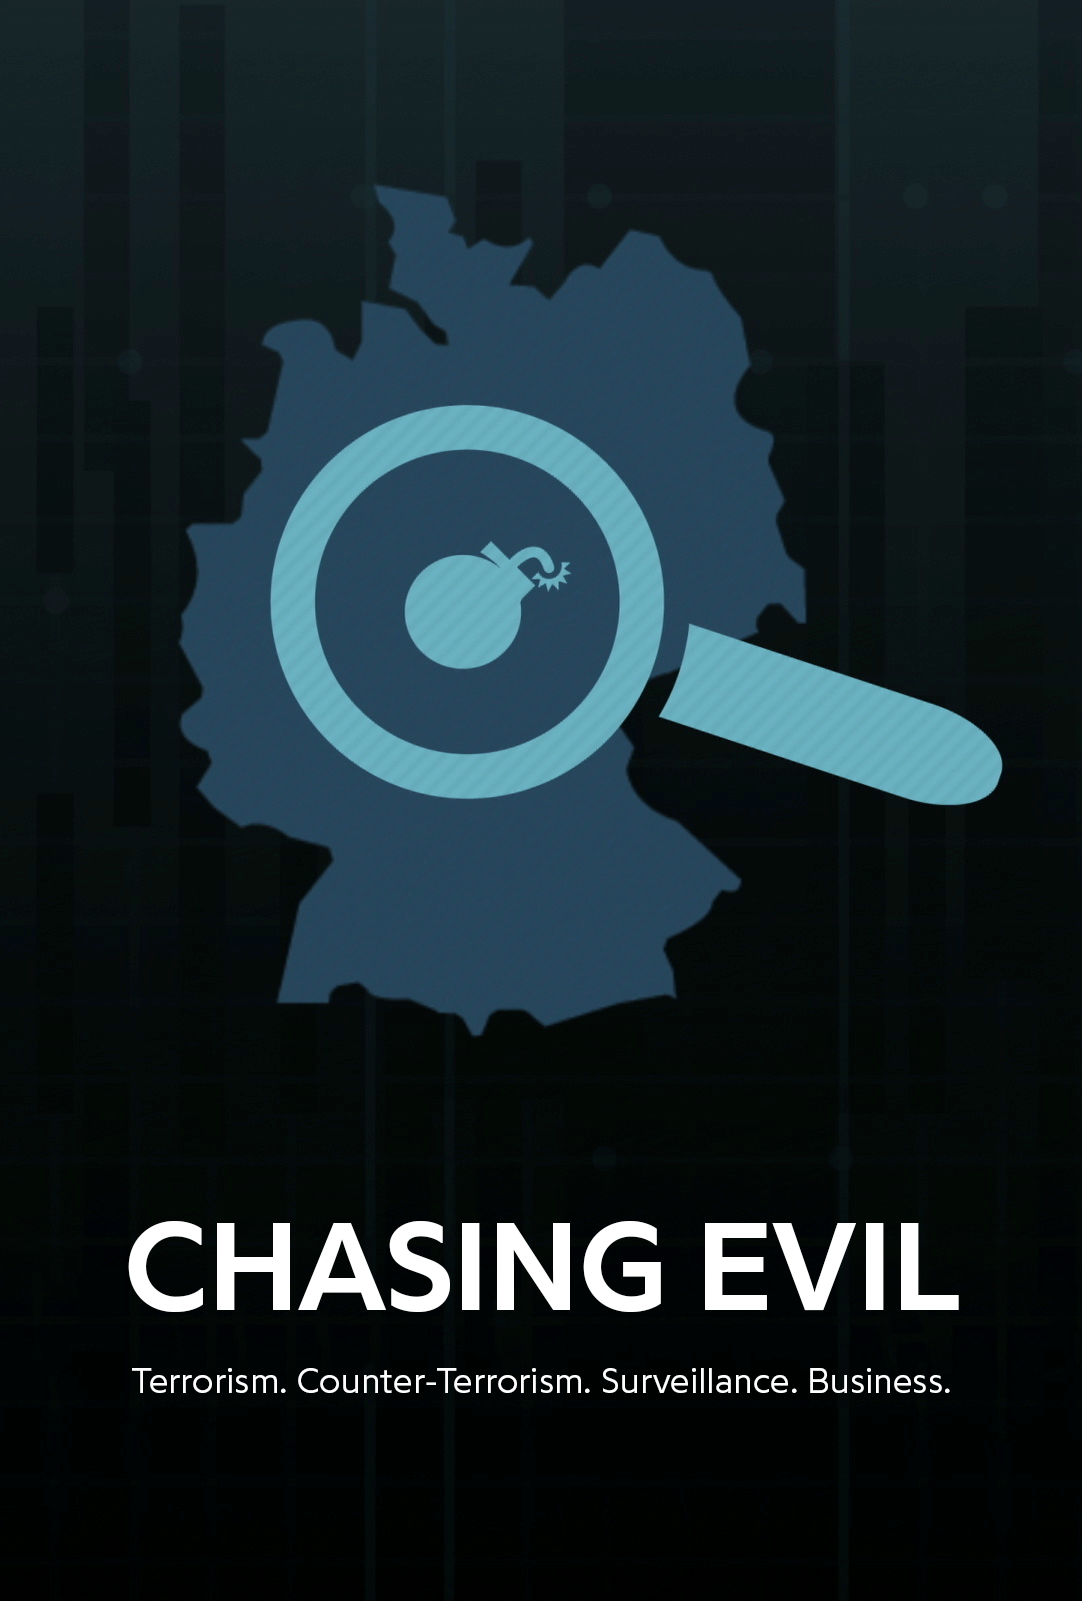 Chasing Evil: Hunting Terror on the Web